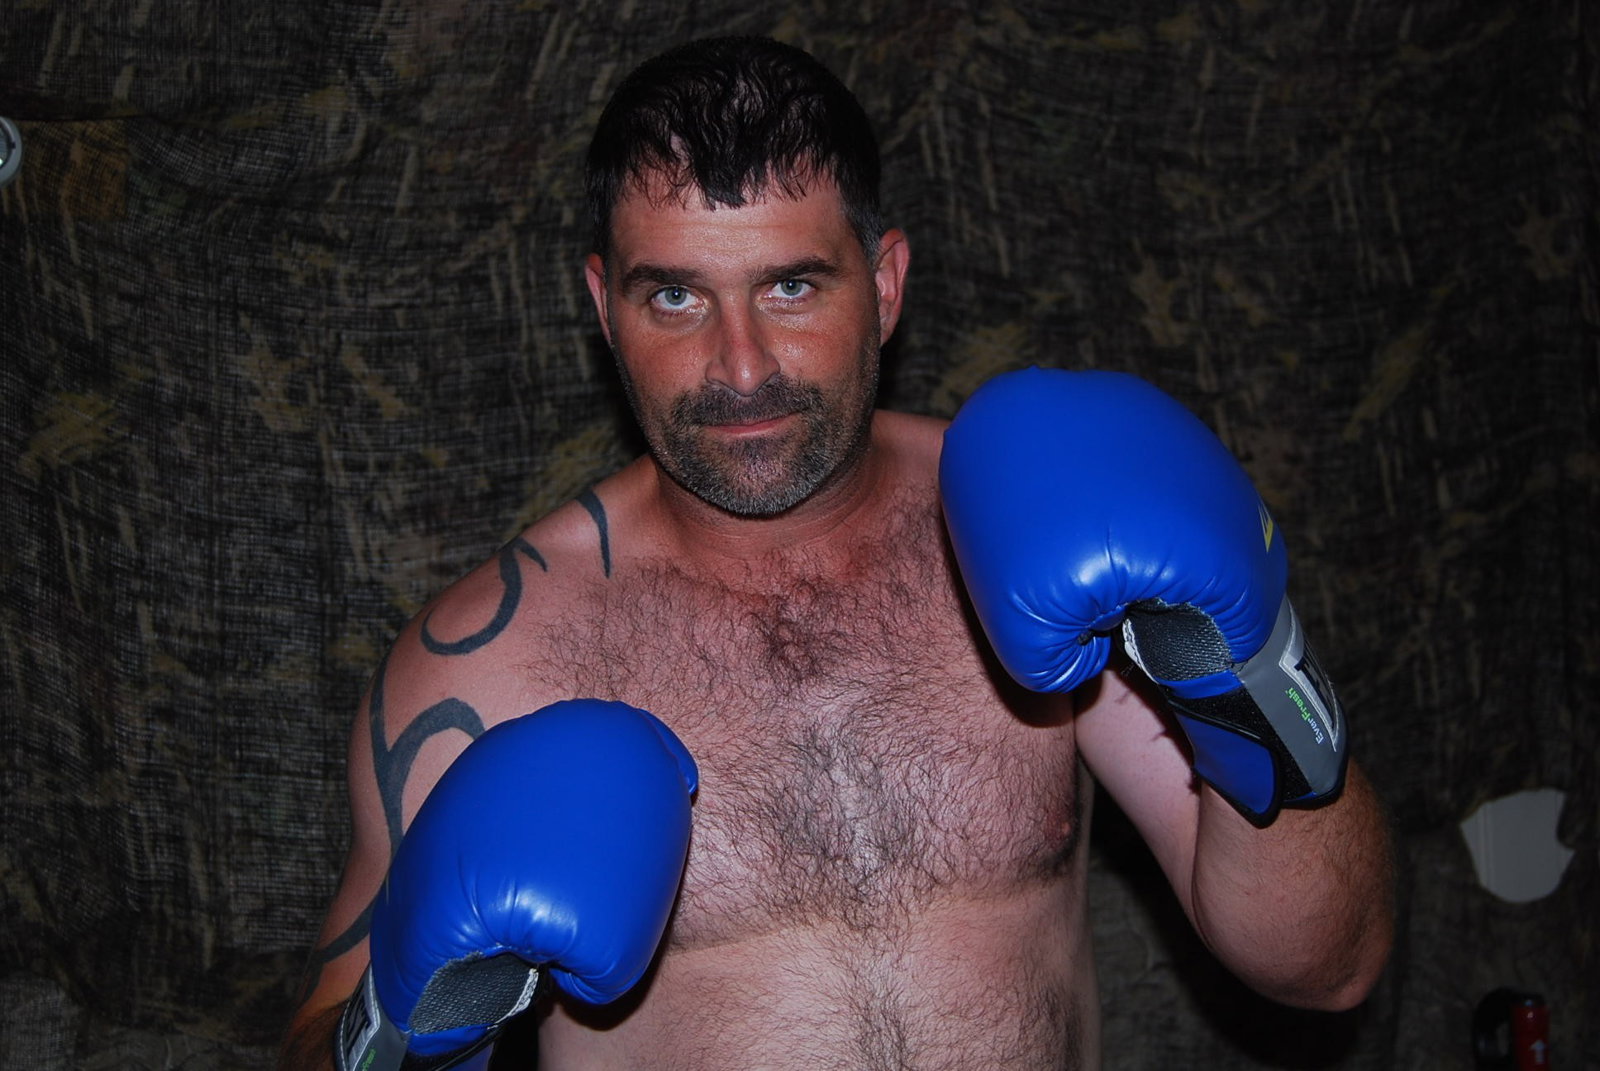 Photo by Hairy Musclebears with the username @hairymusclebears,  September 24, 2019 at 3:26 AM and the text says 'Boxing Goatee Musclebear Man from USAFUR.com galleries #GayDaddy #Instagay #GayChub #GayCub #hairybelly #BearPhotoADay #gaychubby #bearweek365 #bearsofinstagram #moobs #humanpuppy #humanpupplay #gaypupplay #gayexercisepup #gaymuscle #puppypride #gaykink..'